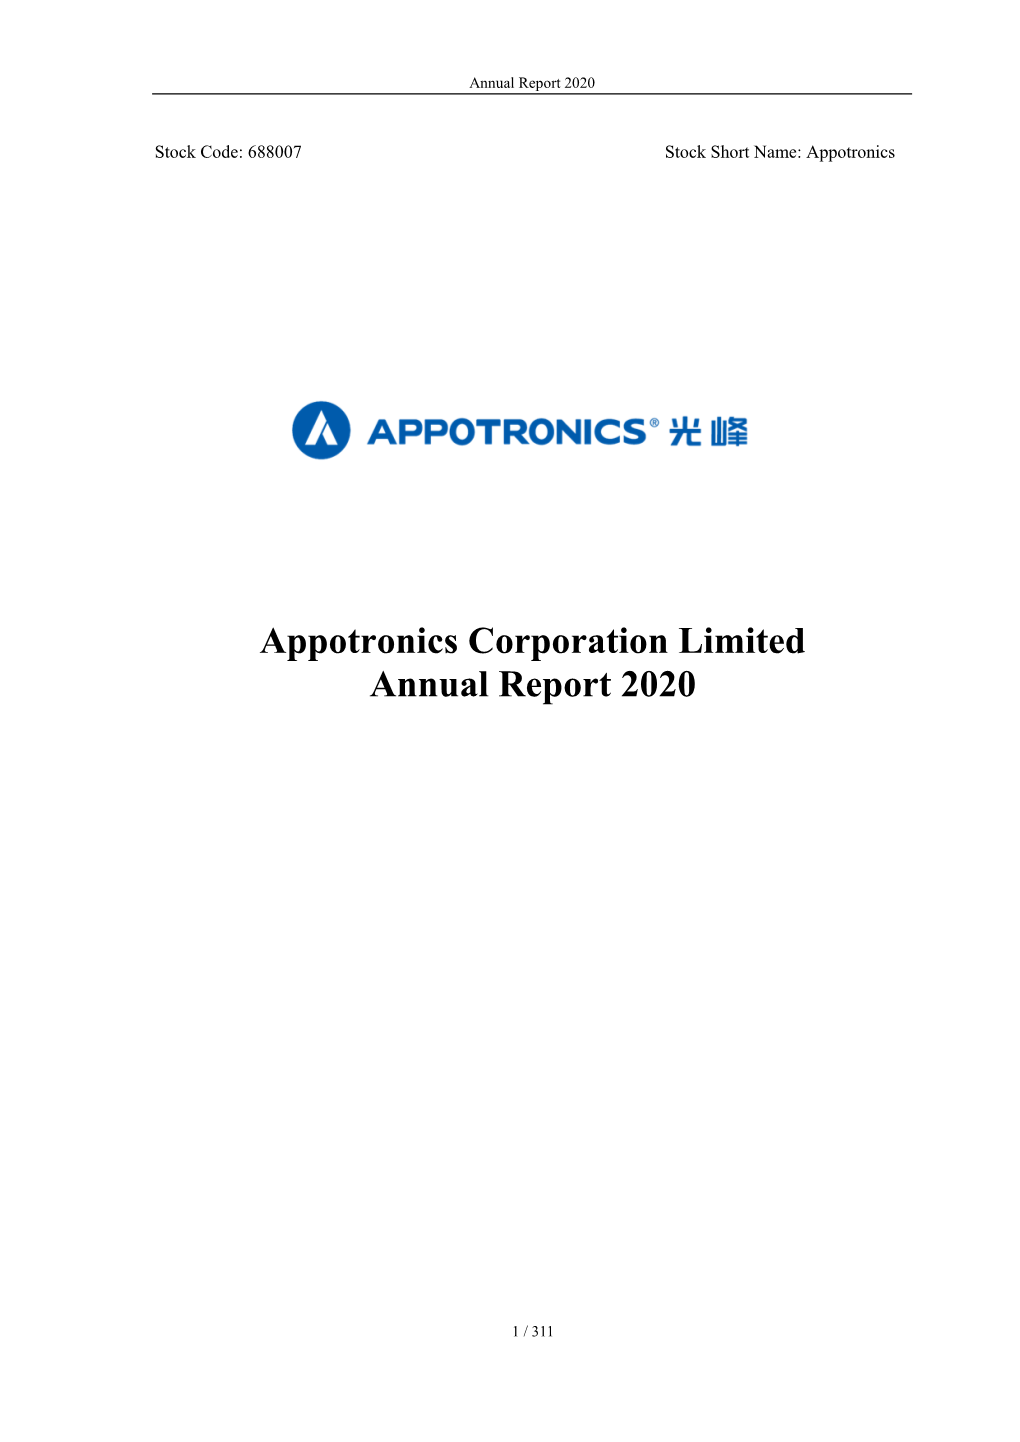 Appotronics Corporation Limited Annual Report 2020